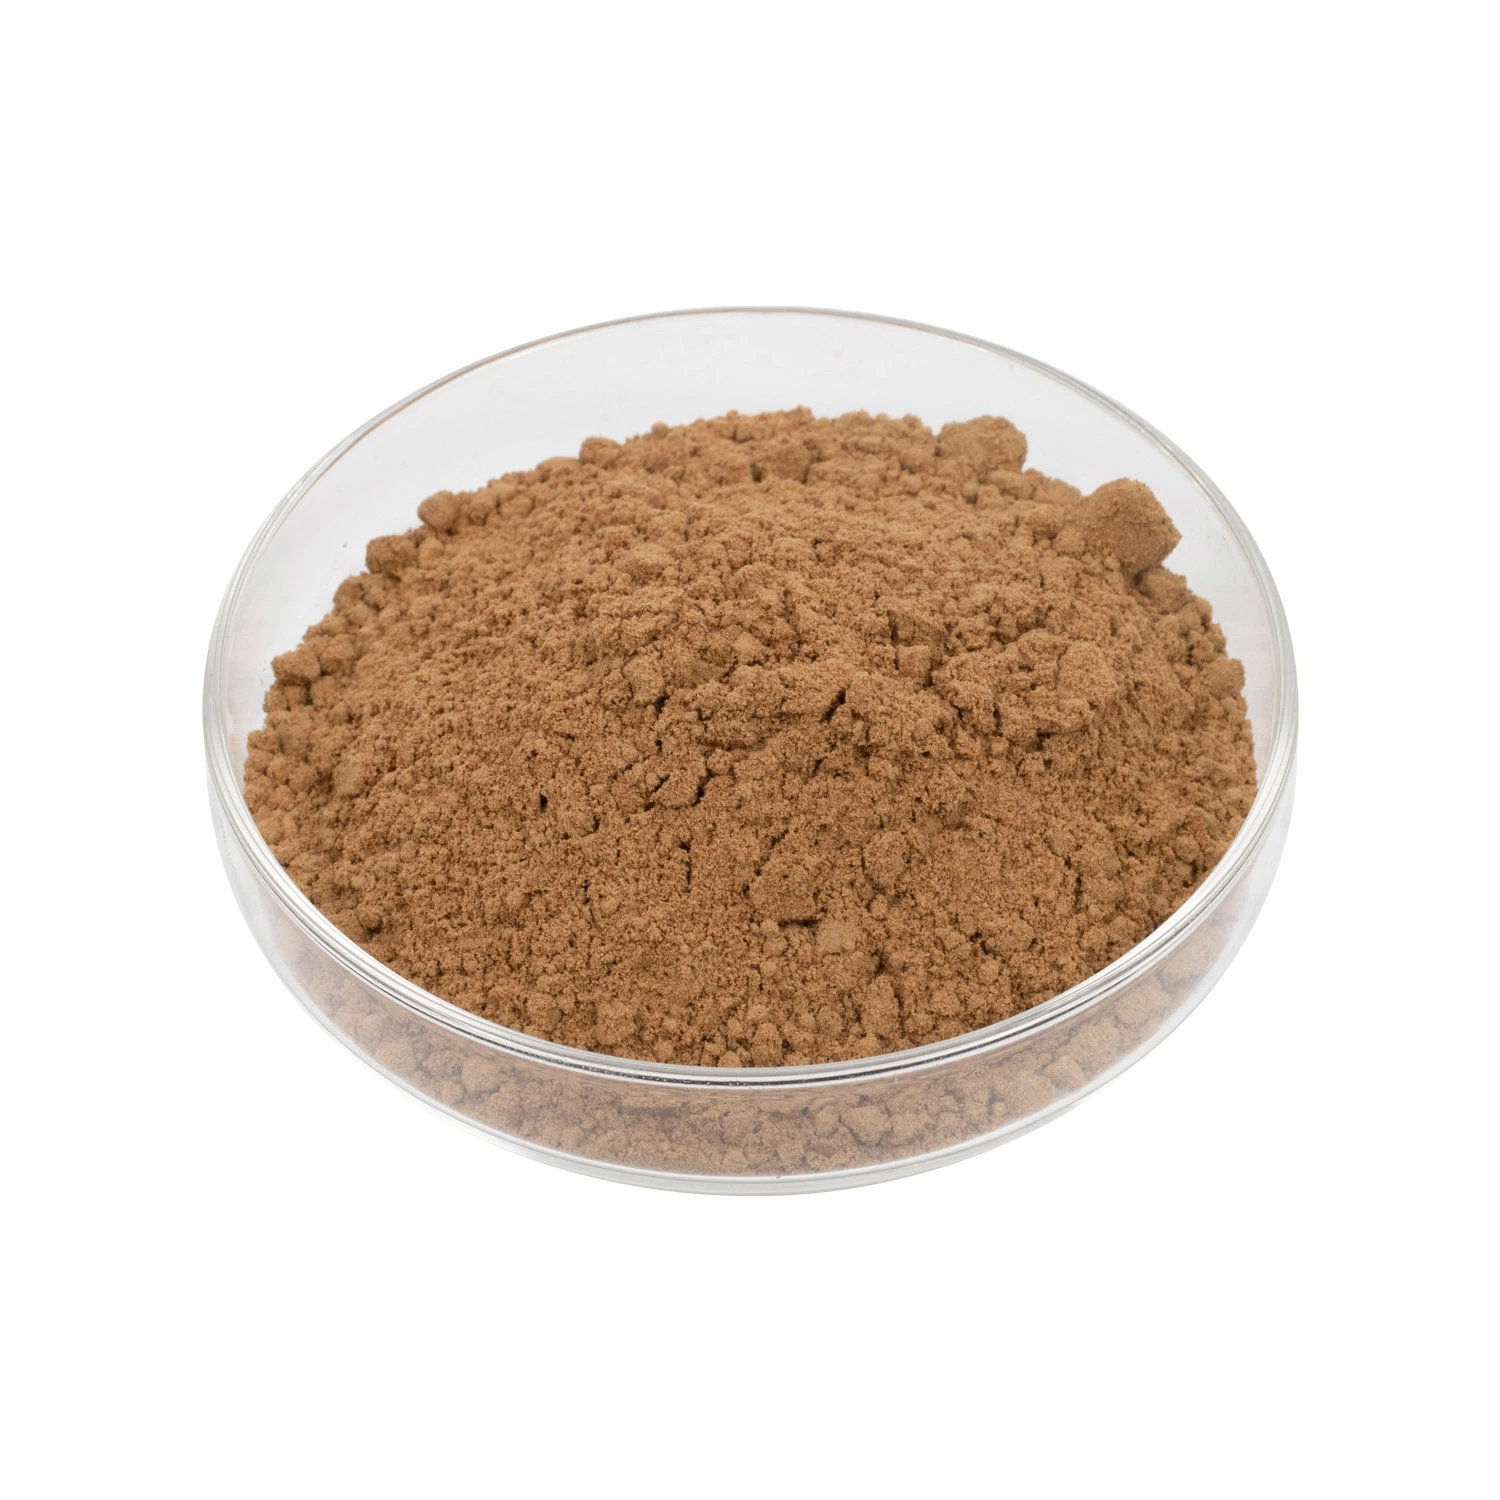 100% Natural Suanzaoren Jujuba Seed Extract Total Saponins 2% Herbal Plant